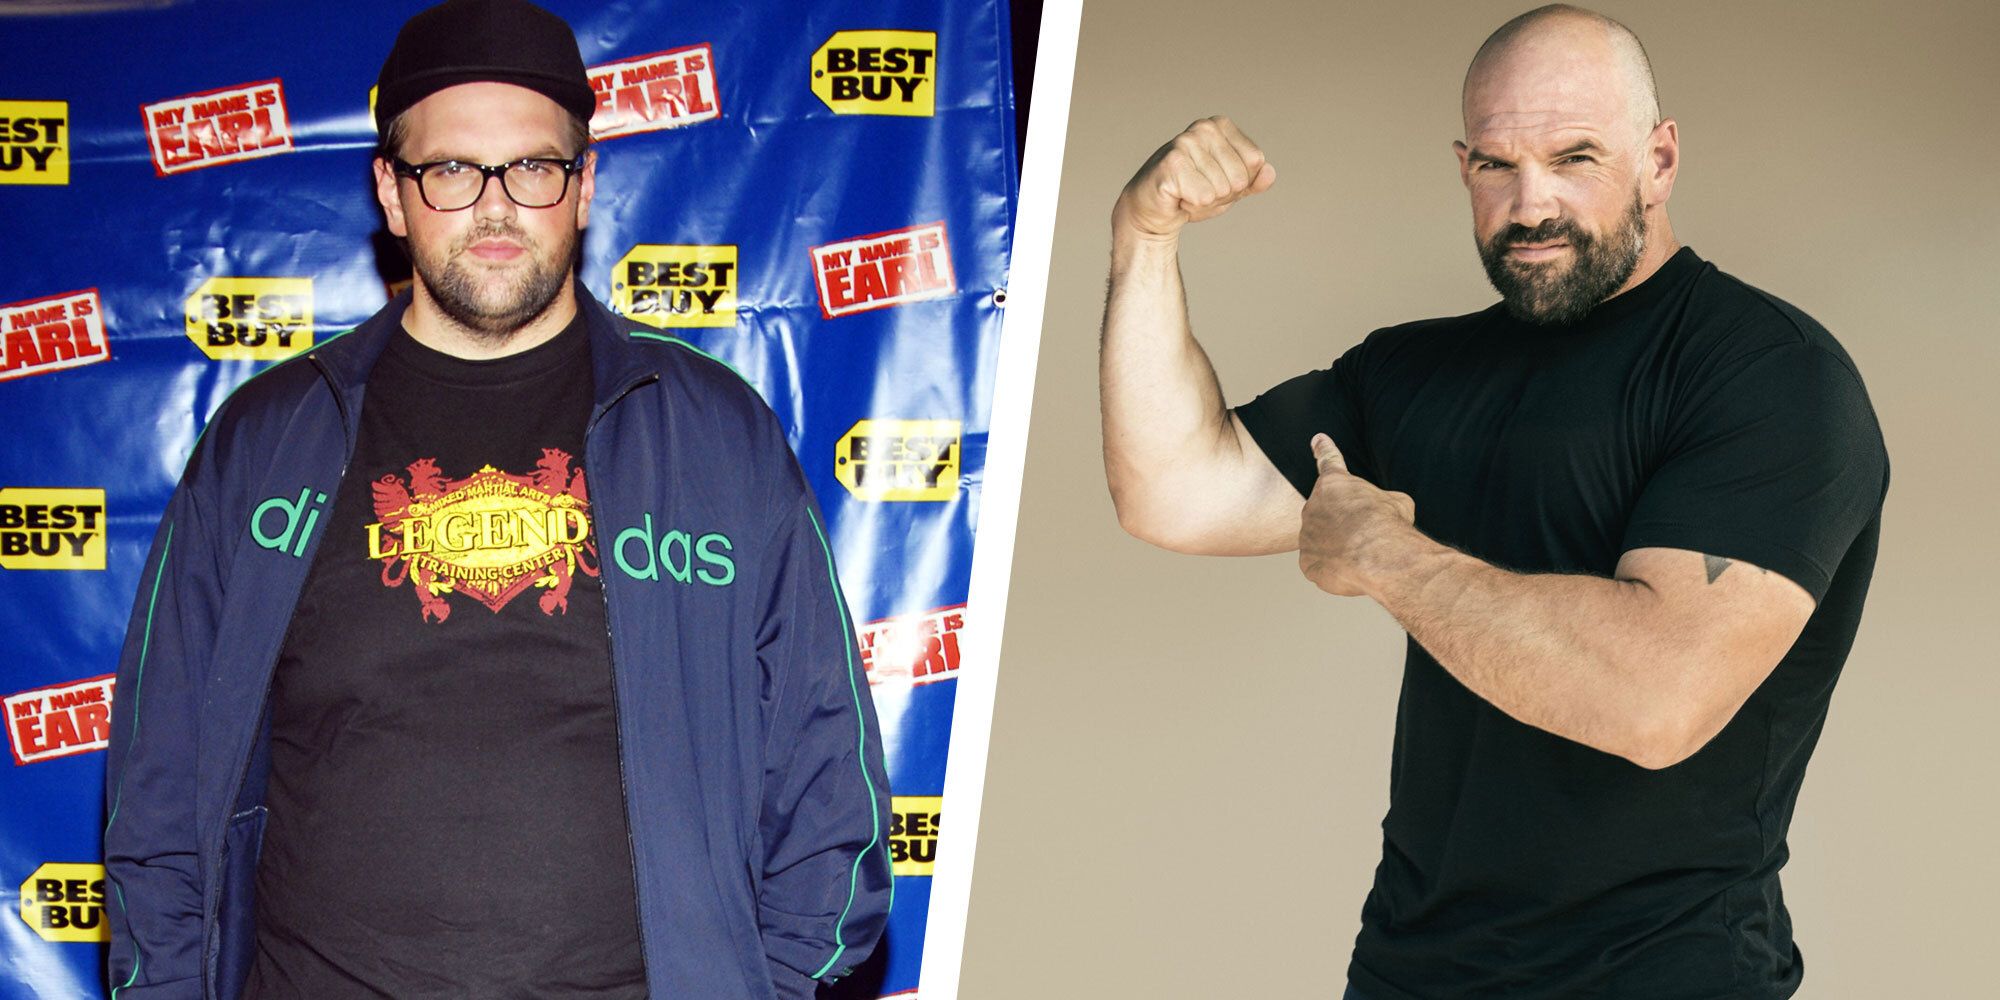 Actor Ethan Suplee 200-Pound Weight Loss photo photo